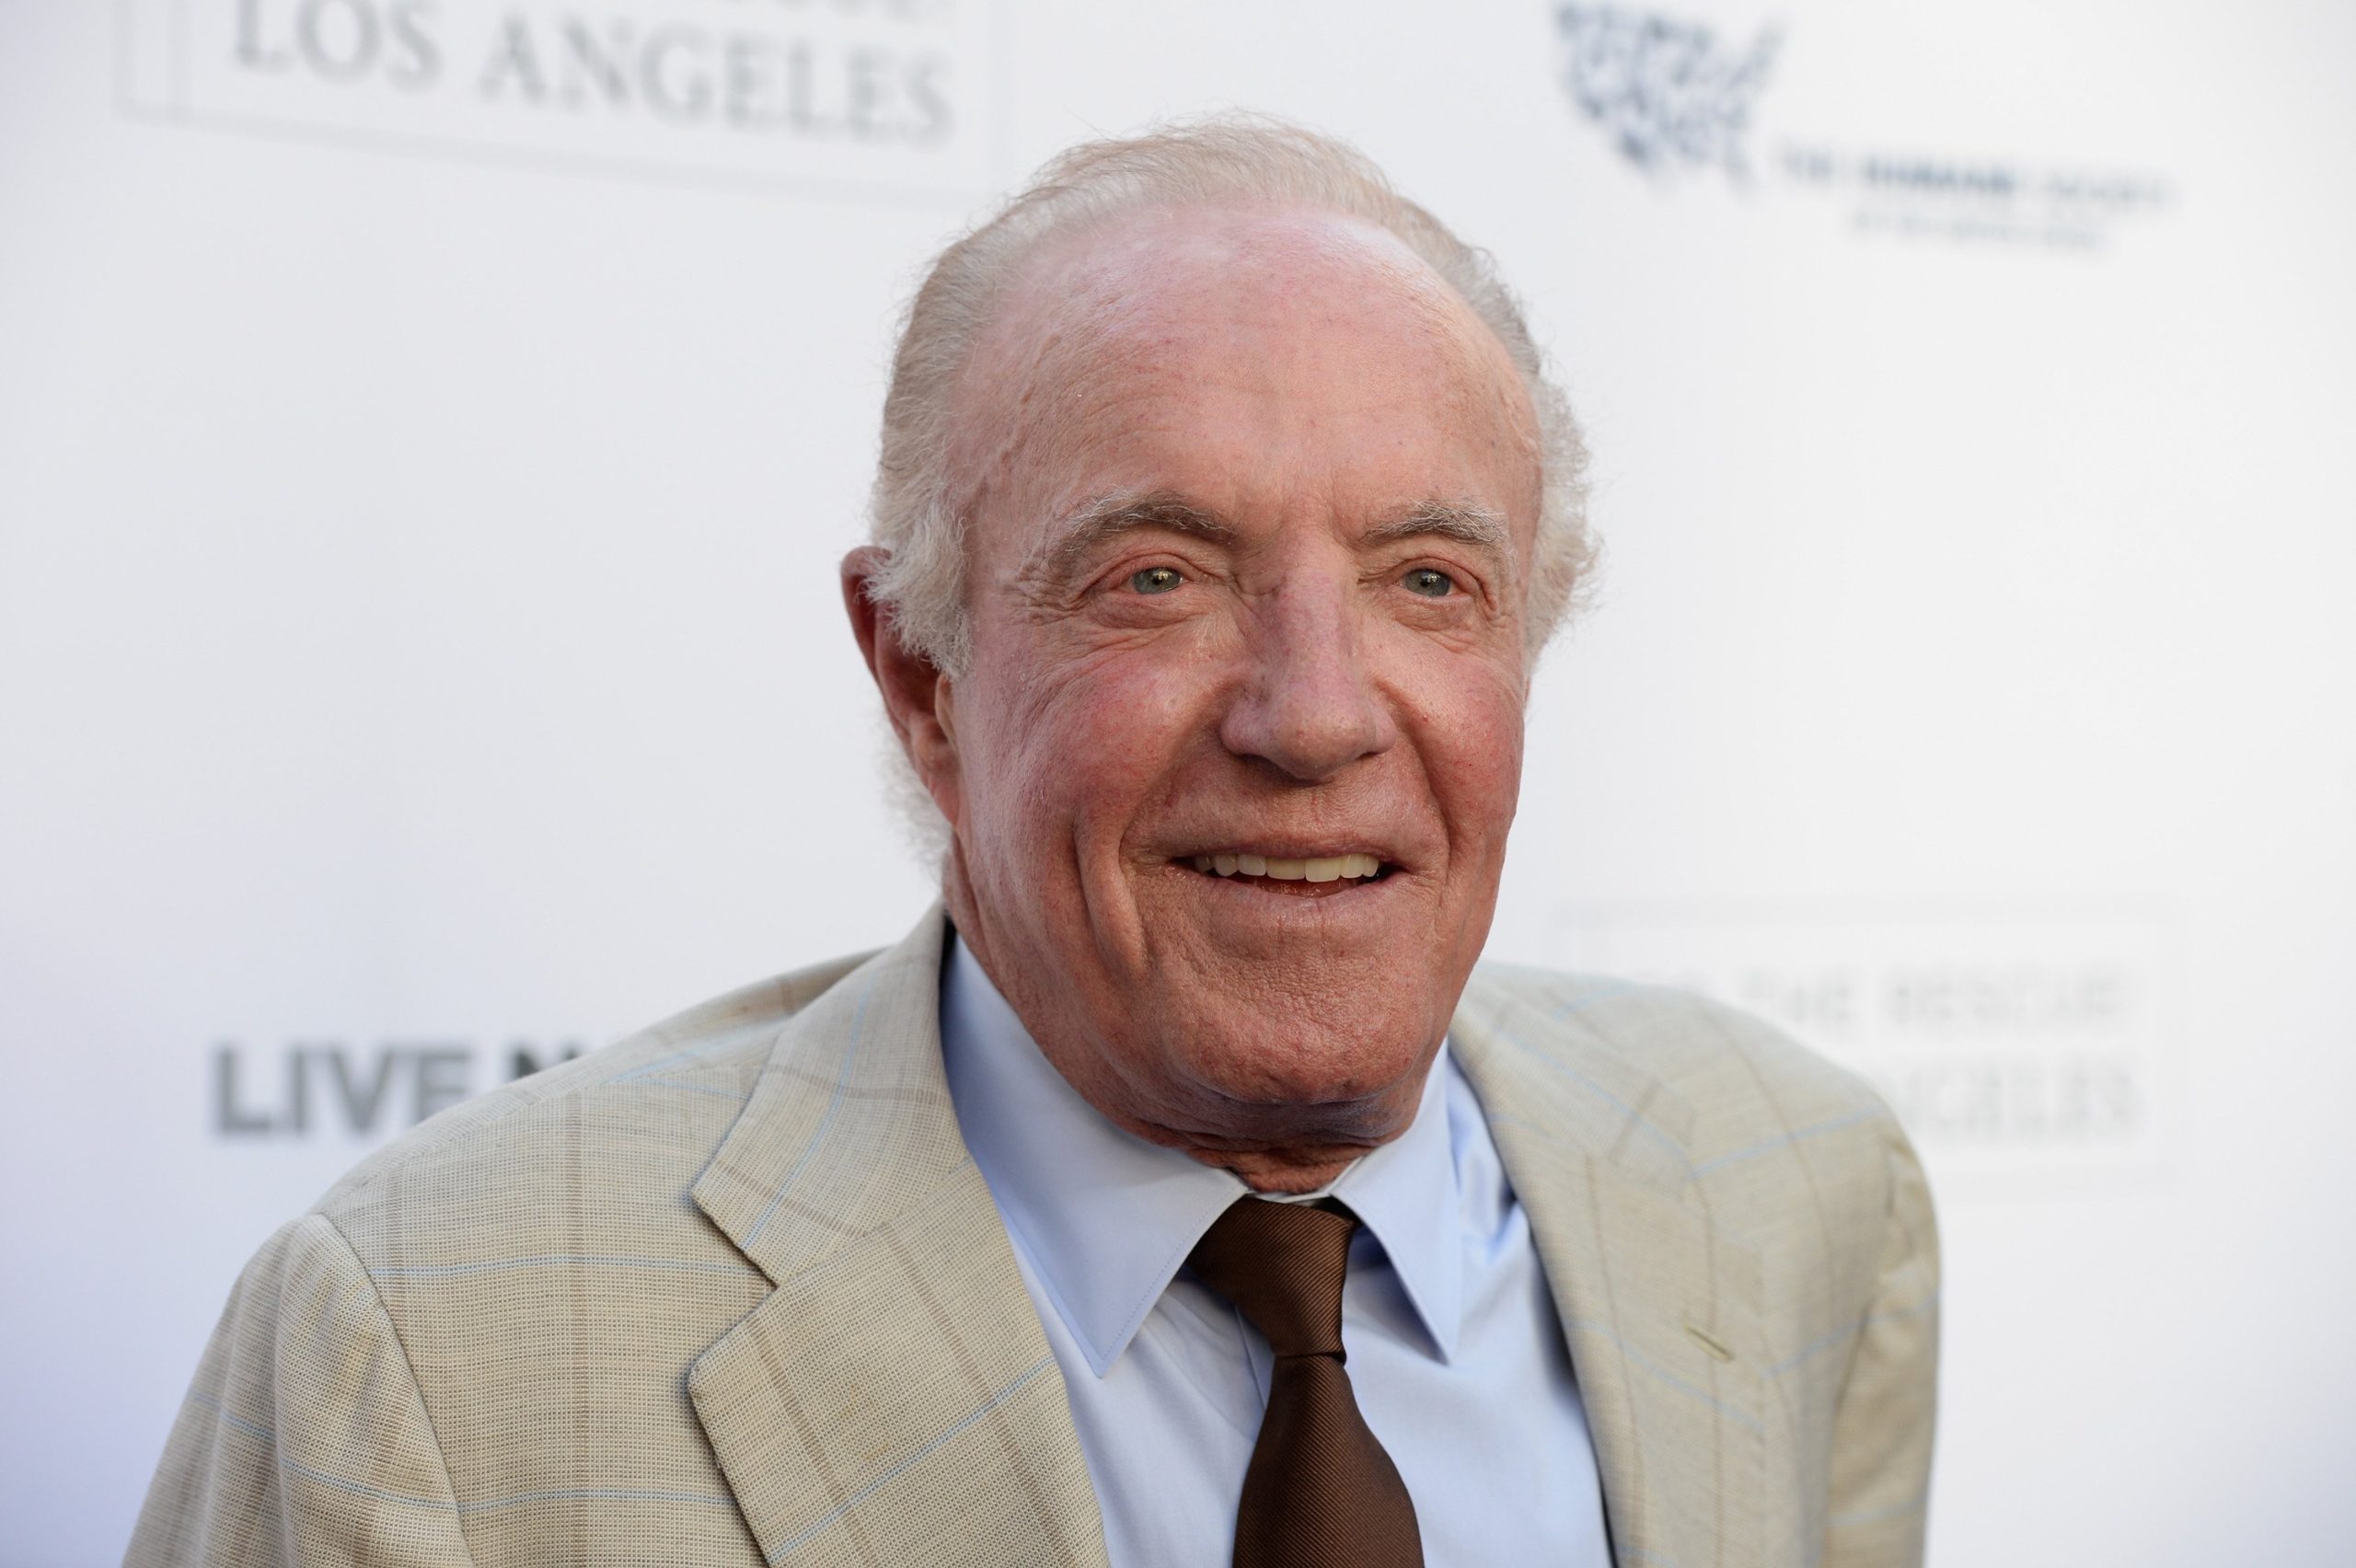 James Caan Wiki, Bio, Age, Net Worth, and Other Facts